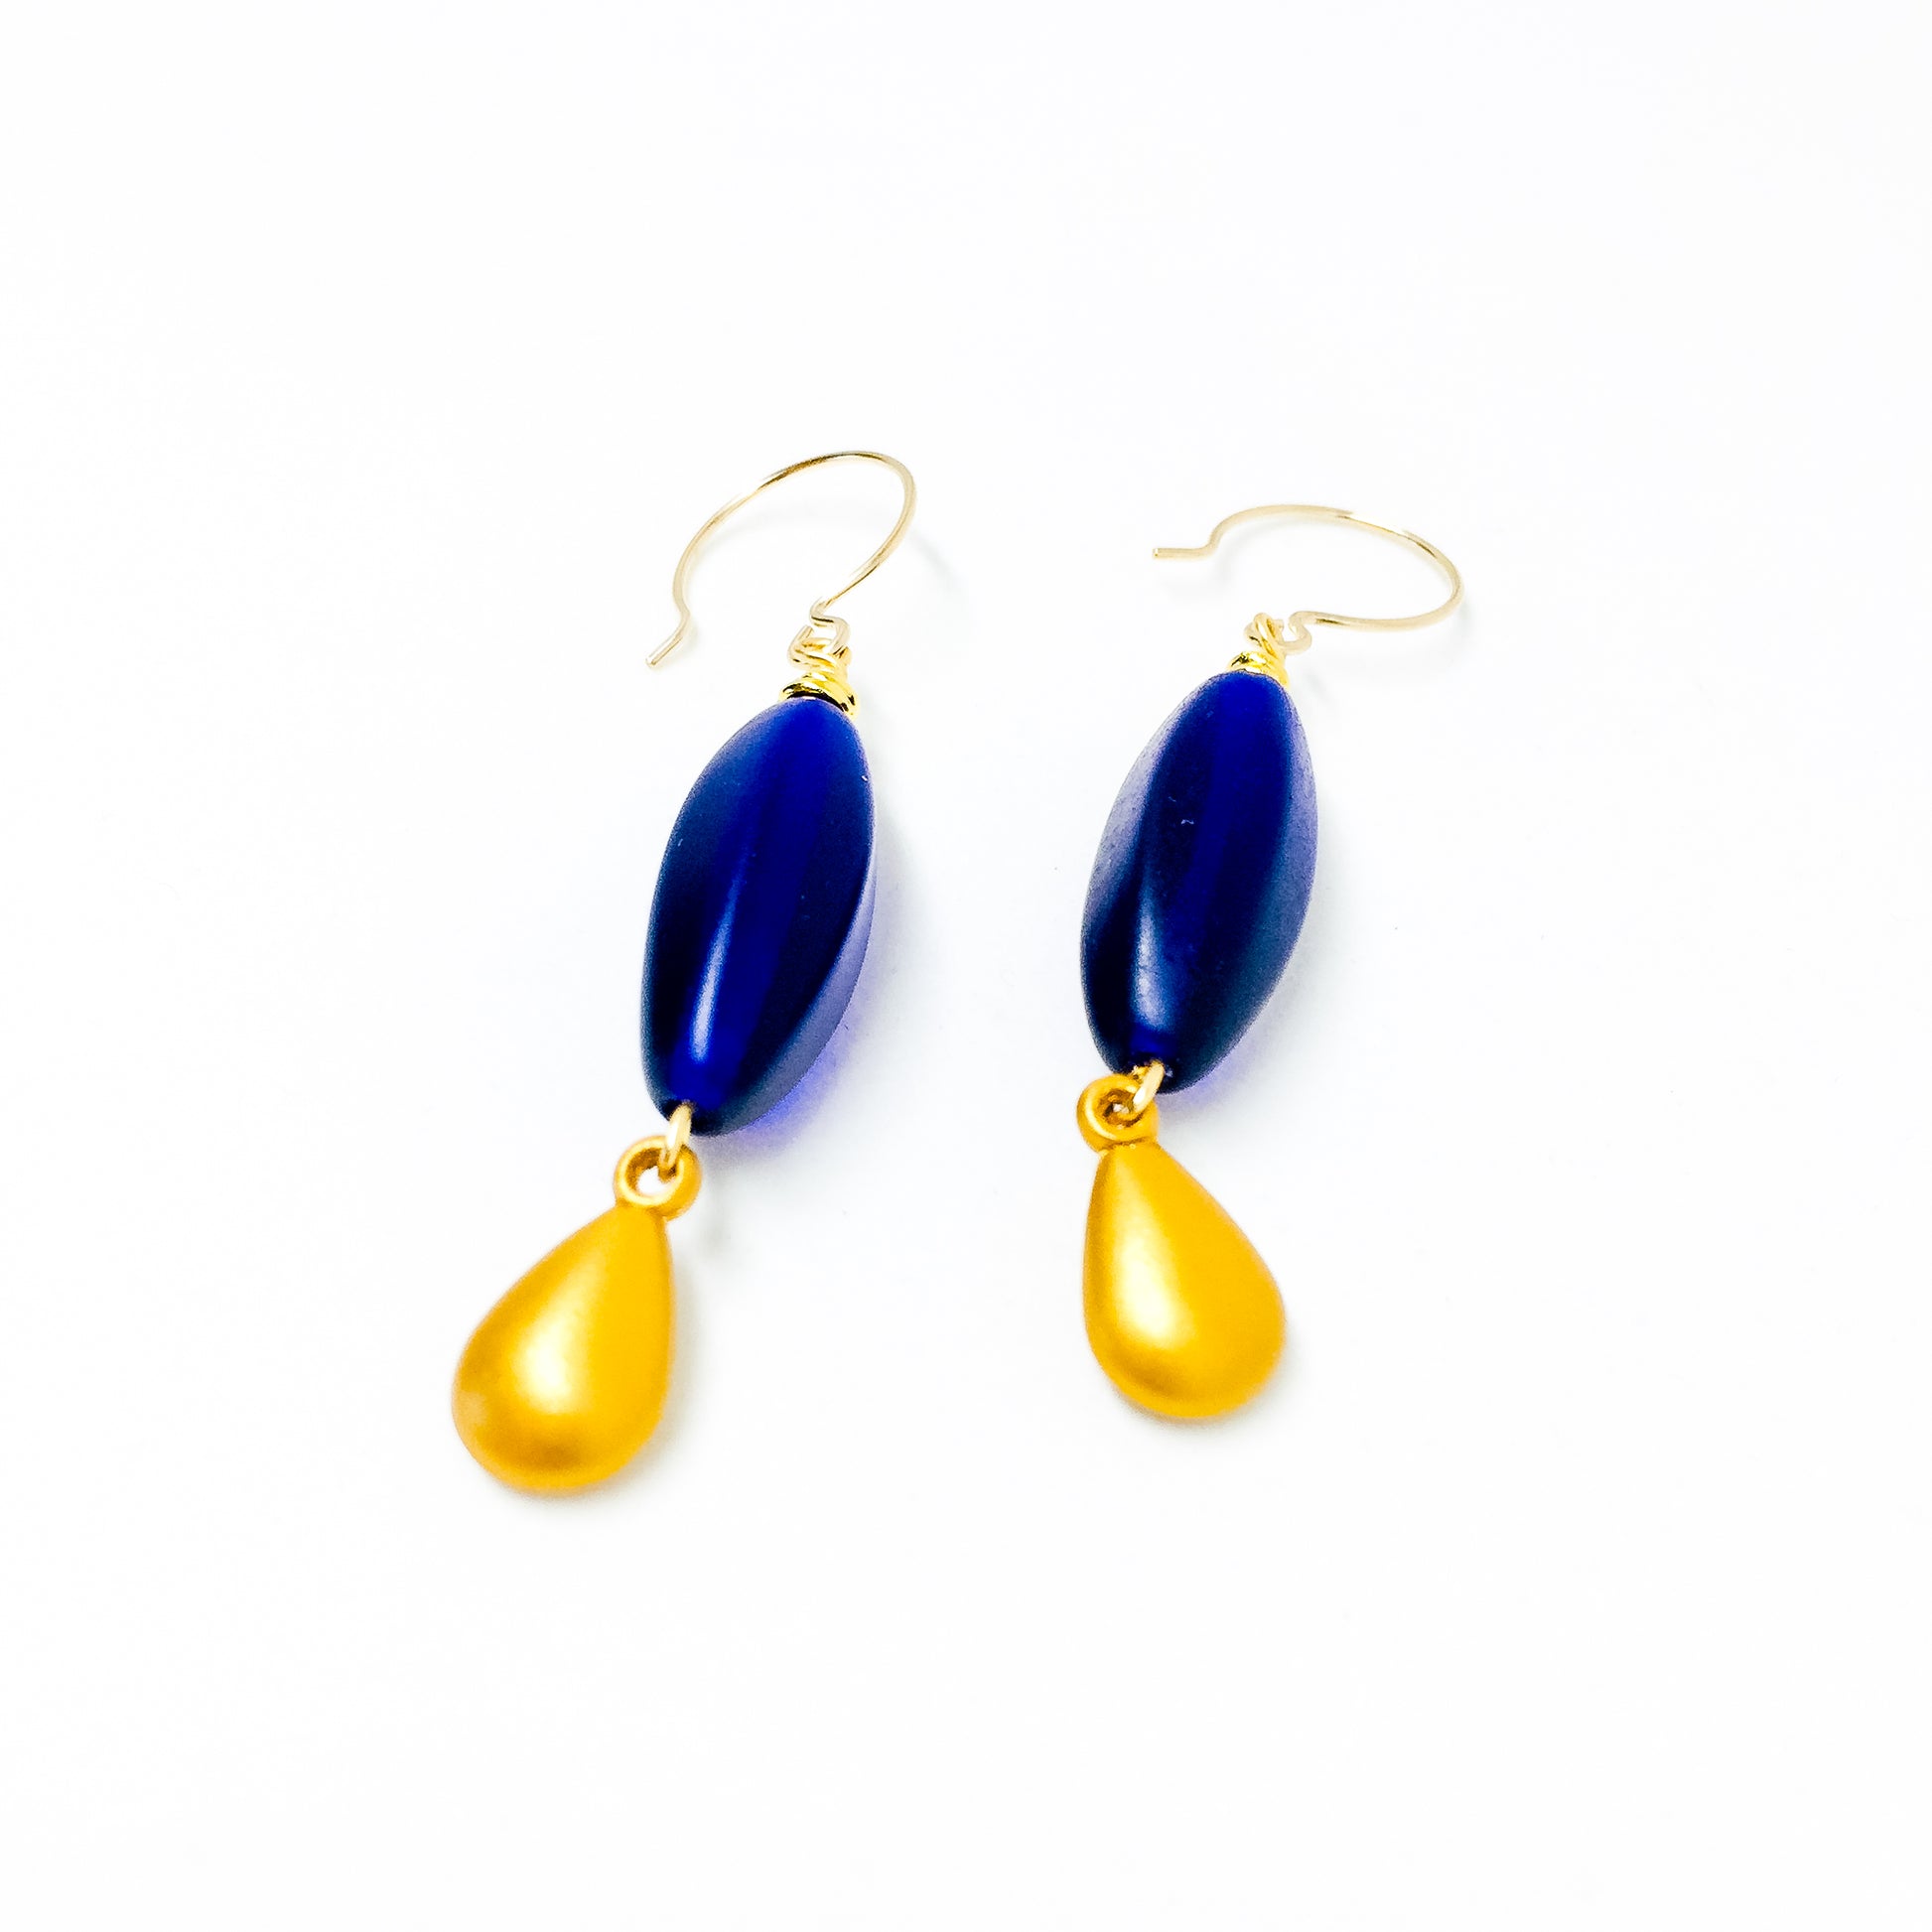 Blue Frosted Czech glass bead drop earrings with gold charm